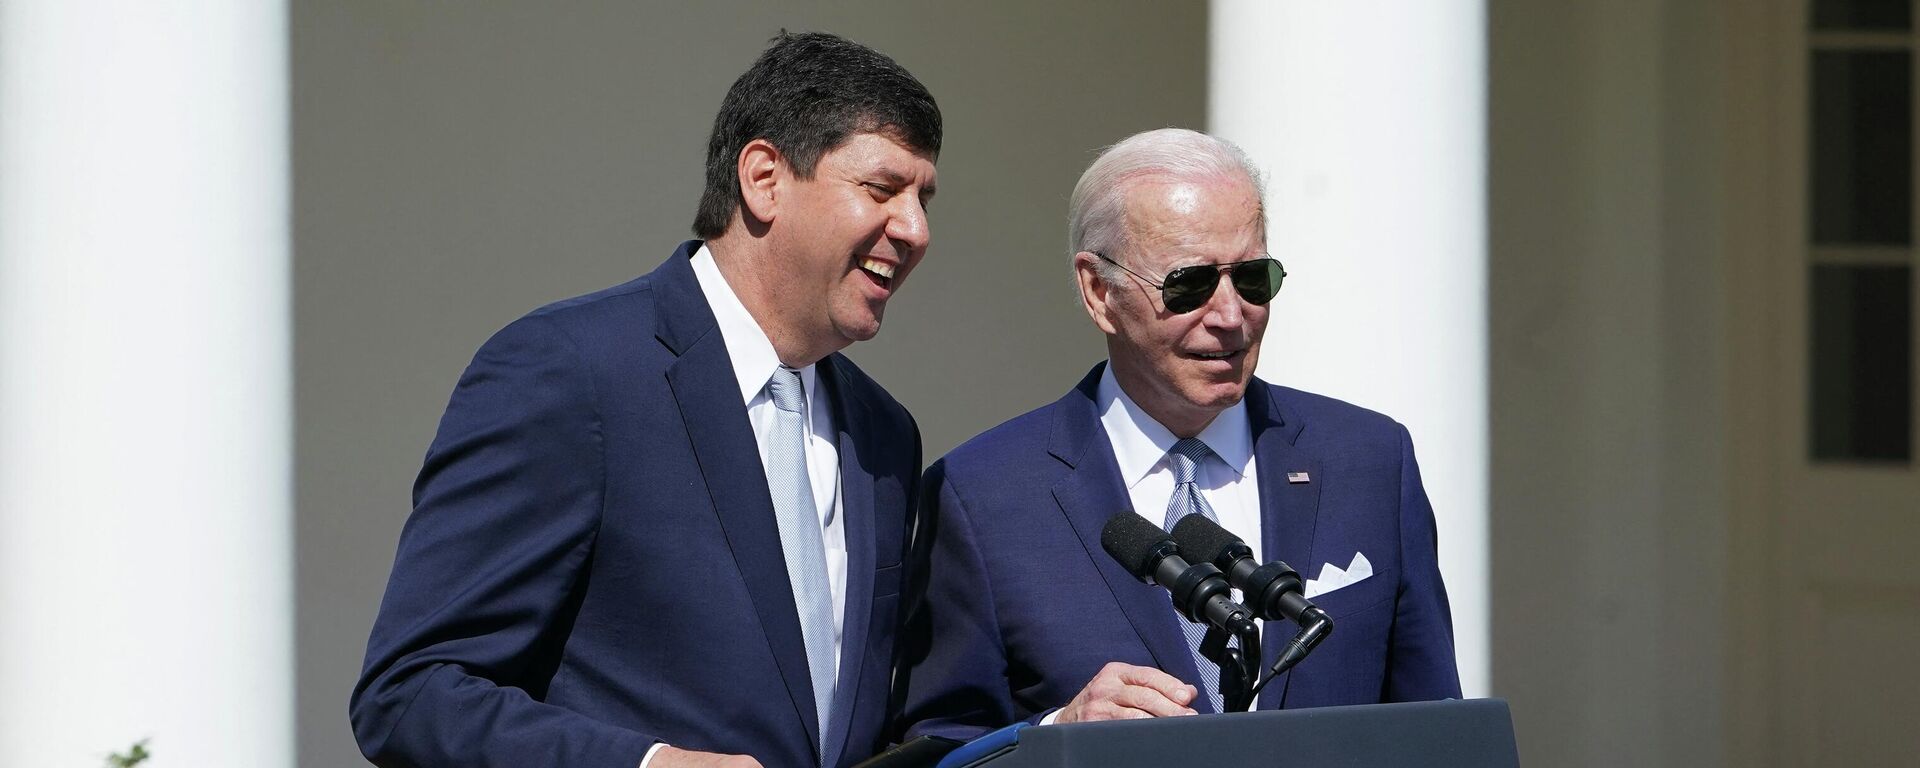 US President Joe Biden (R) stands next to Steve Dettelbach, nominee for director of the Bureau of Alcohol, Tobacco, Firearms, and Explosives, after he spoke on measures to combat gun crime from the Rose Garden of the White House in Washington, DC, on April 11, 2022 - Sputnik International, 1920, 12.04.2022